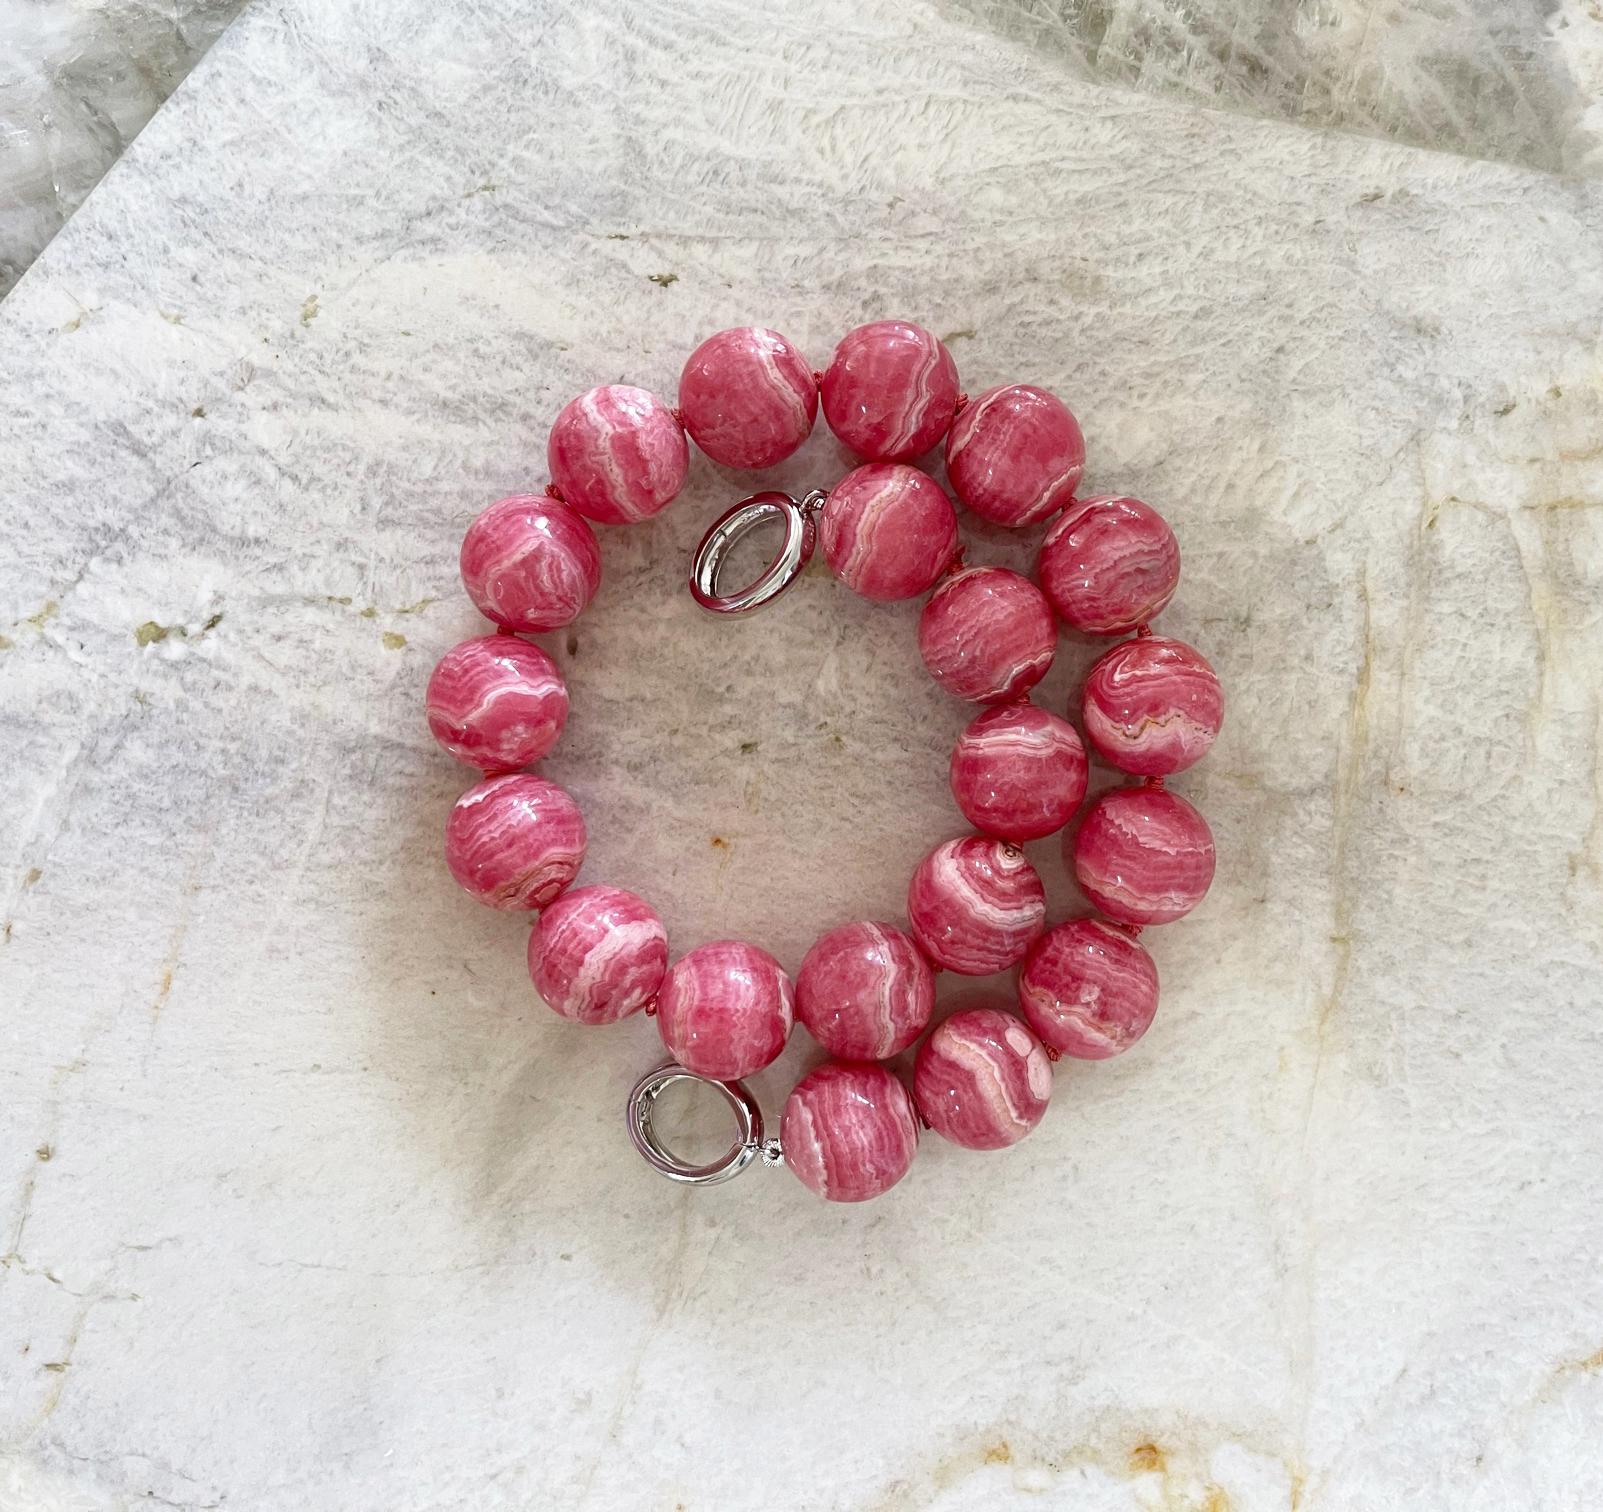 This is a truly spectacular top quality natural rhodochrosite necklace comprised of hand knotted 20mm round natural rhodochrosite beads and an elegant sterling silver interlocking clasp with rhodium plating to prevent tarnishing. We love this clasp